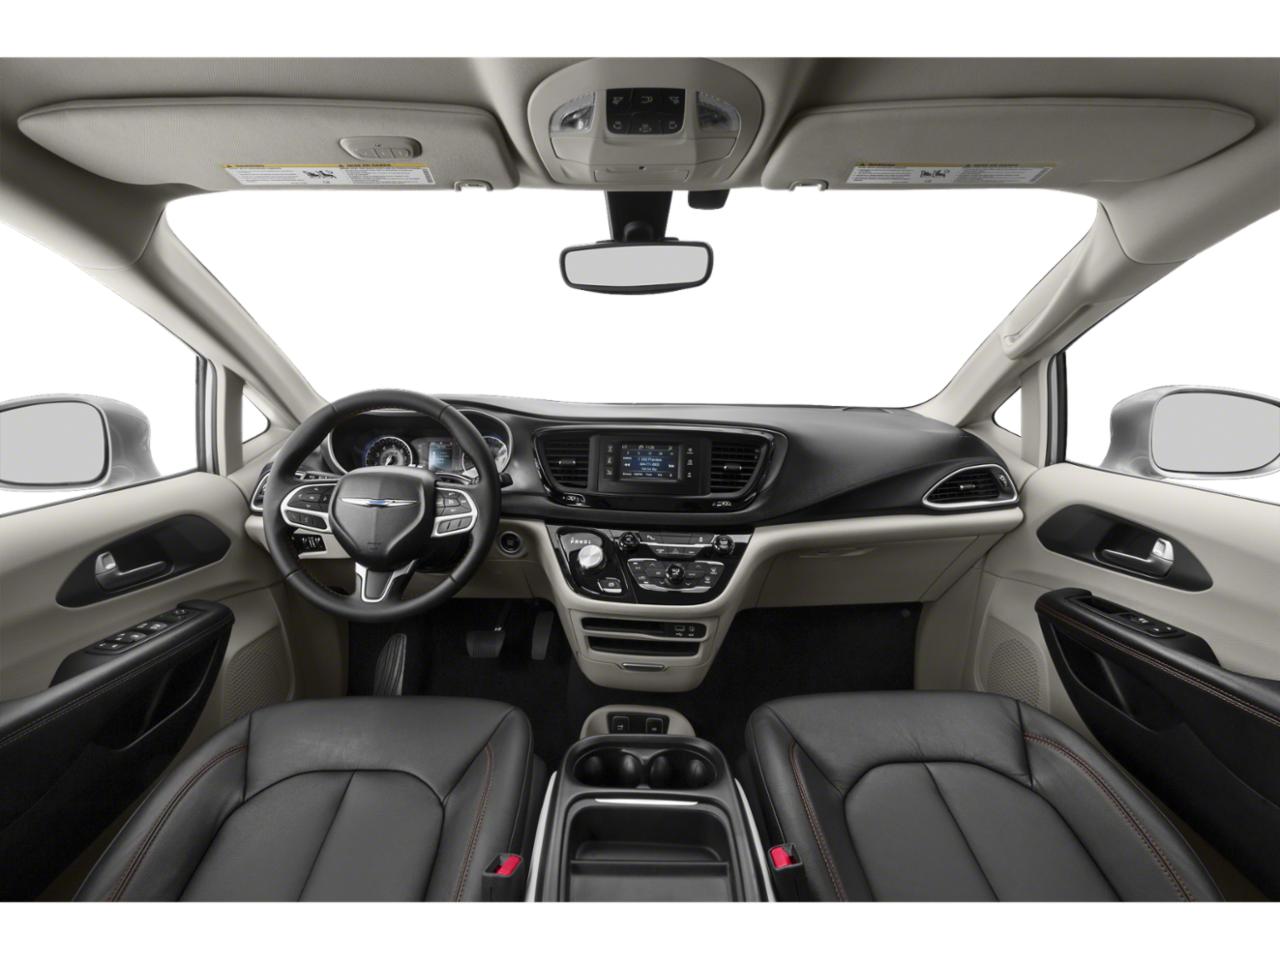 2019 Chrysler Pacifica Vehicle Photo in Pembroke Pines, FL 33027